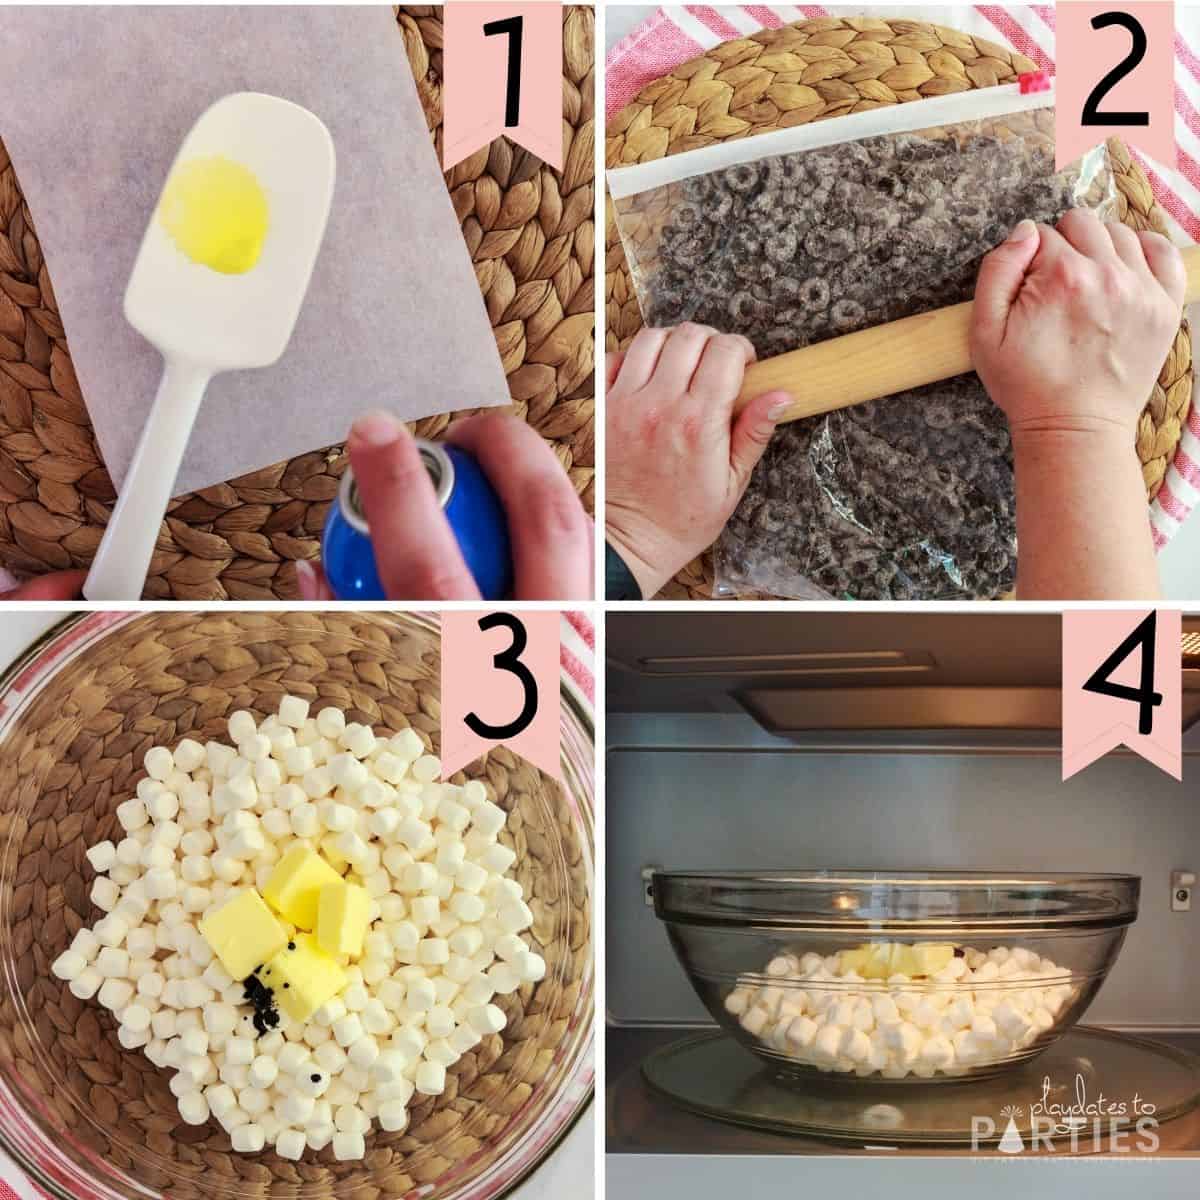 steps 1-4 preparing a spatula, crushing the Oreo cereal, combining and microwaving the marshmallows